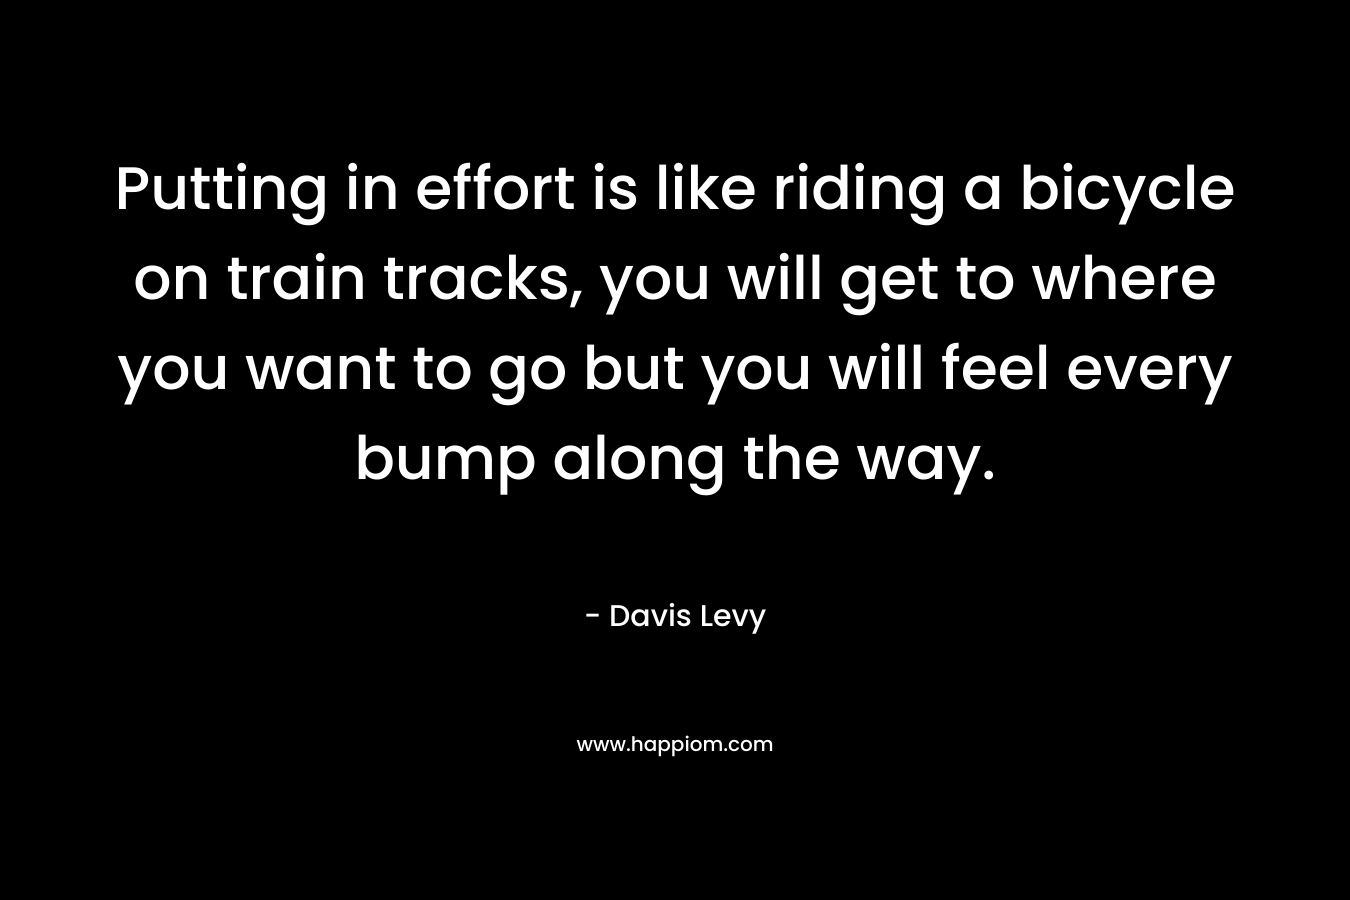 Putting in effort is like riding a bicycle on train tracks, you will get to where you want to go but you will feel every bump along the way. – Davis Levy